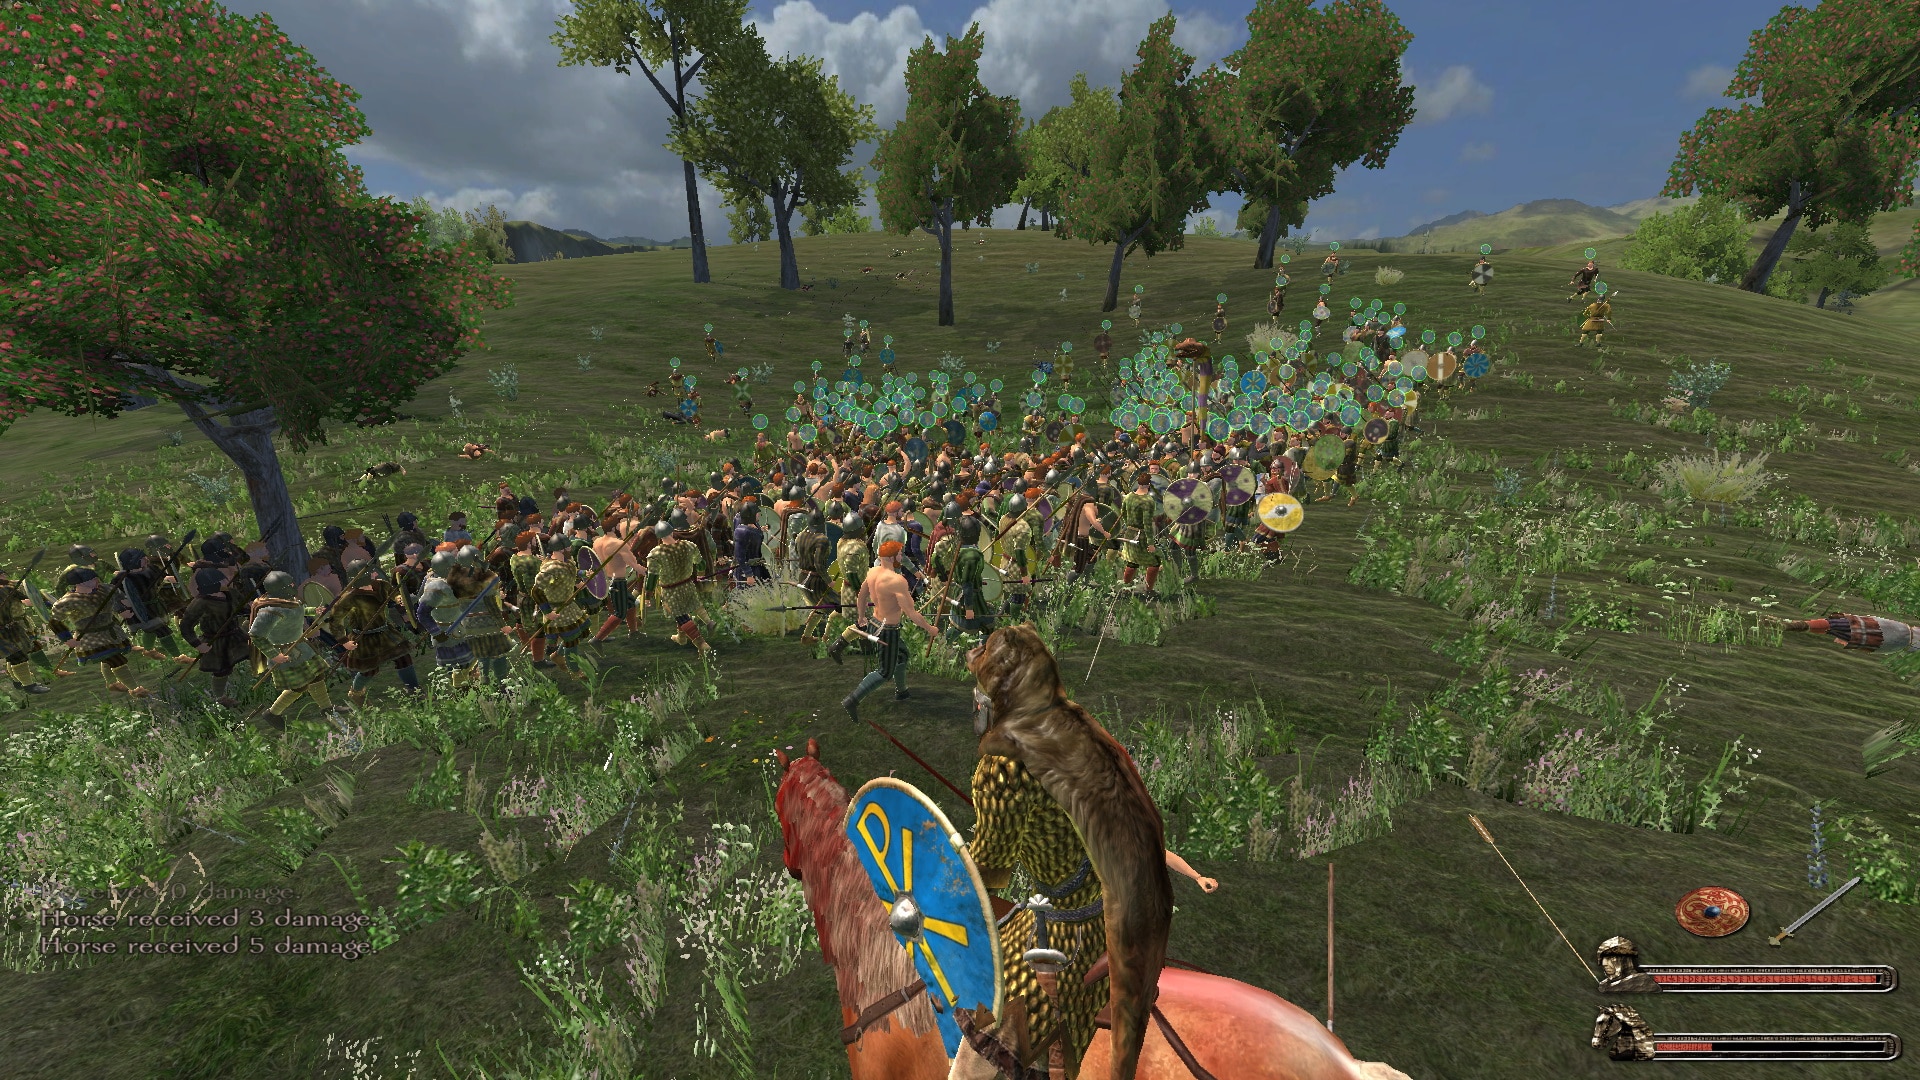 Mount and Blade esercito